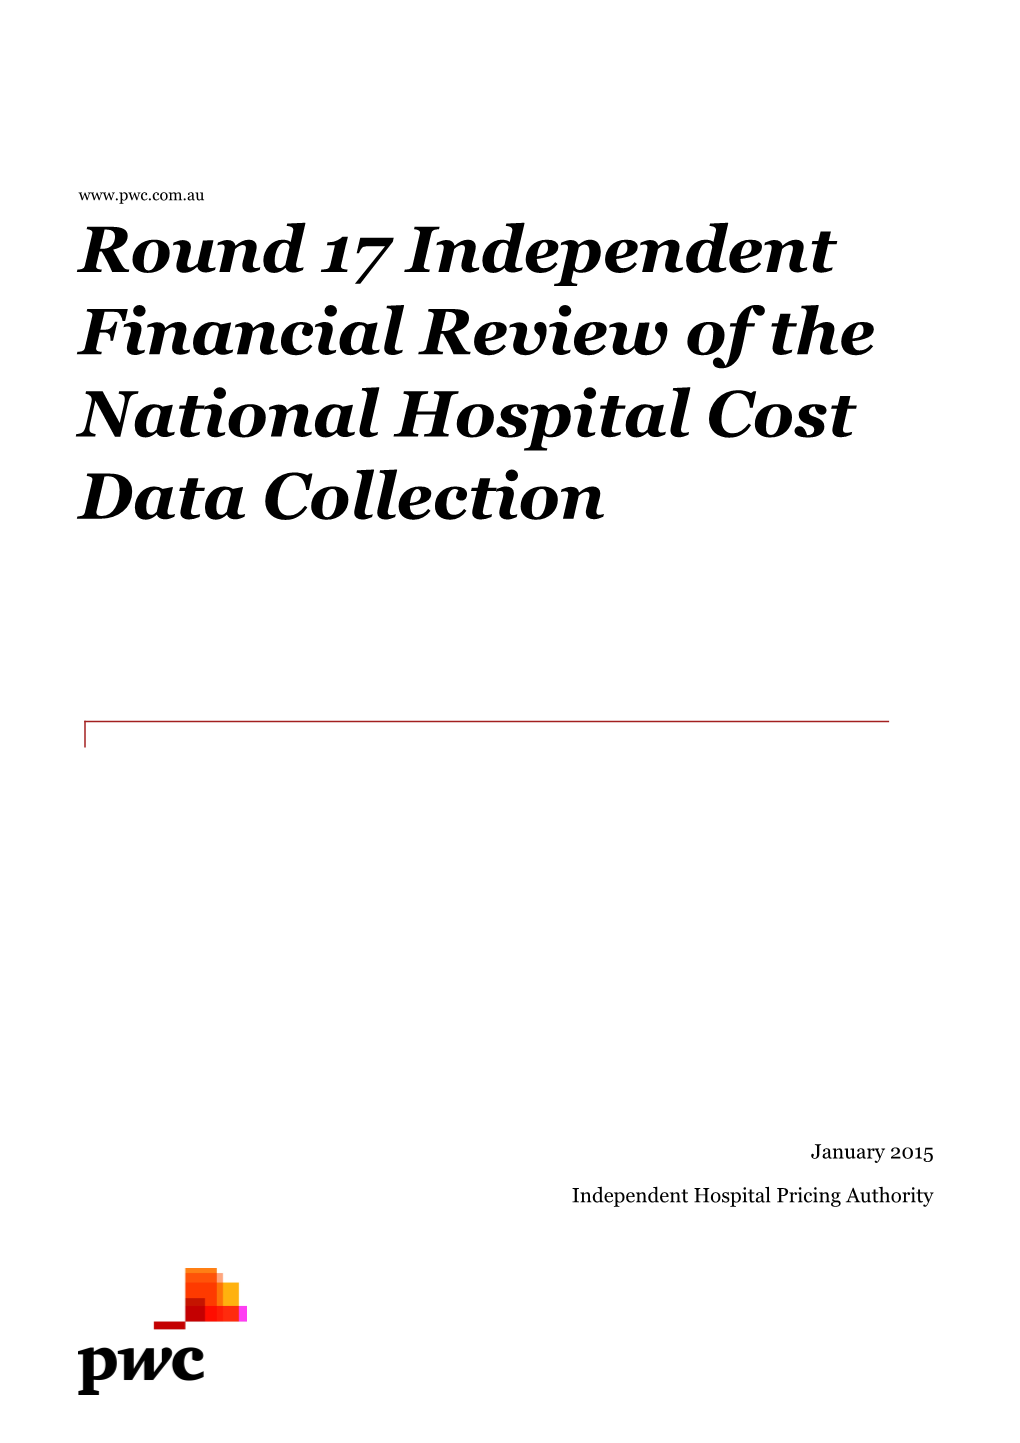 Round 17 Independent Financial Review of the National Hospital Cost Data Collection